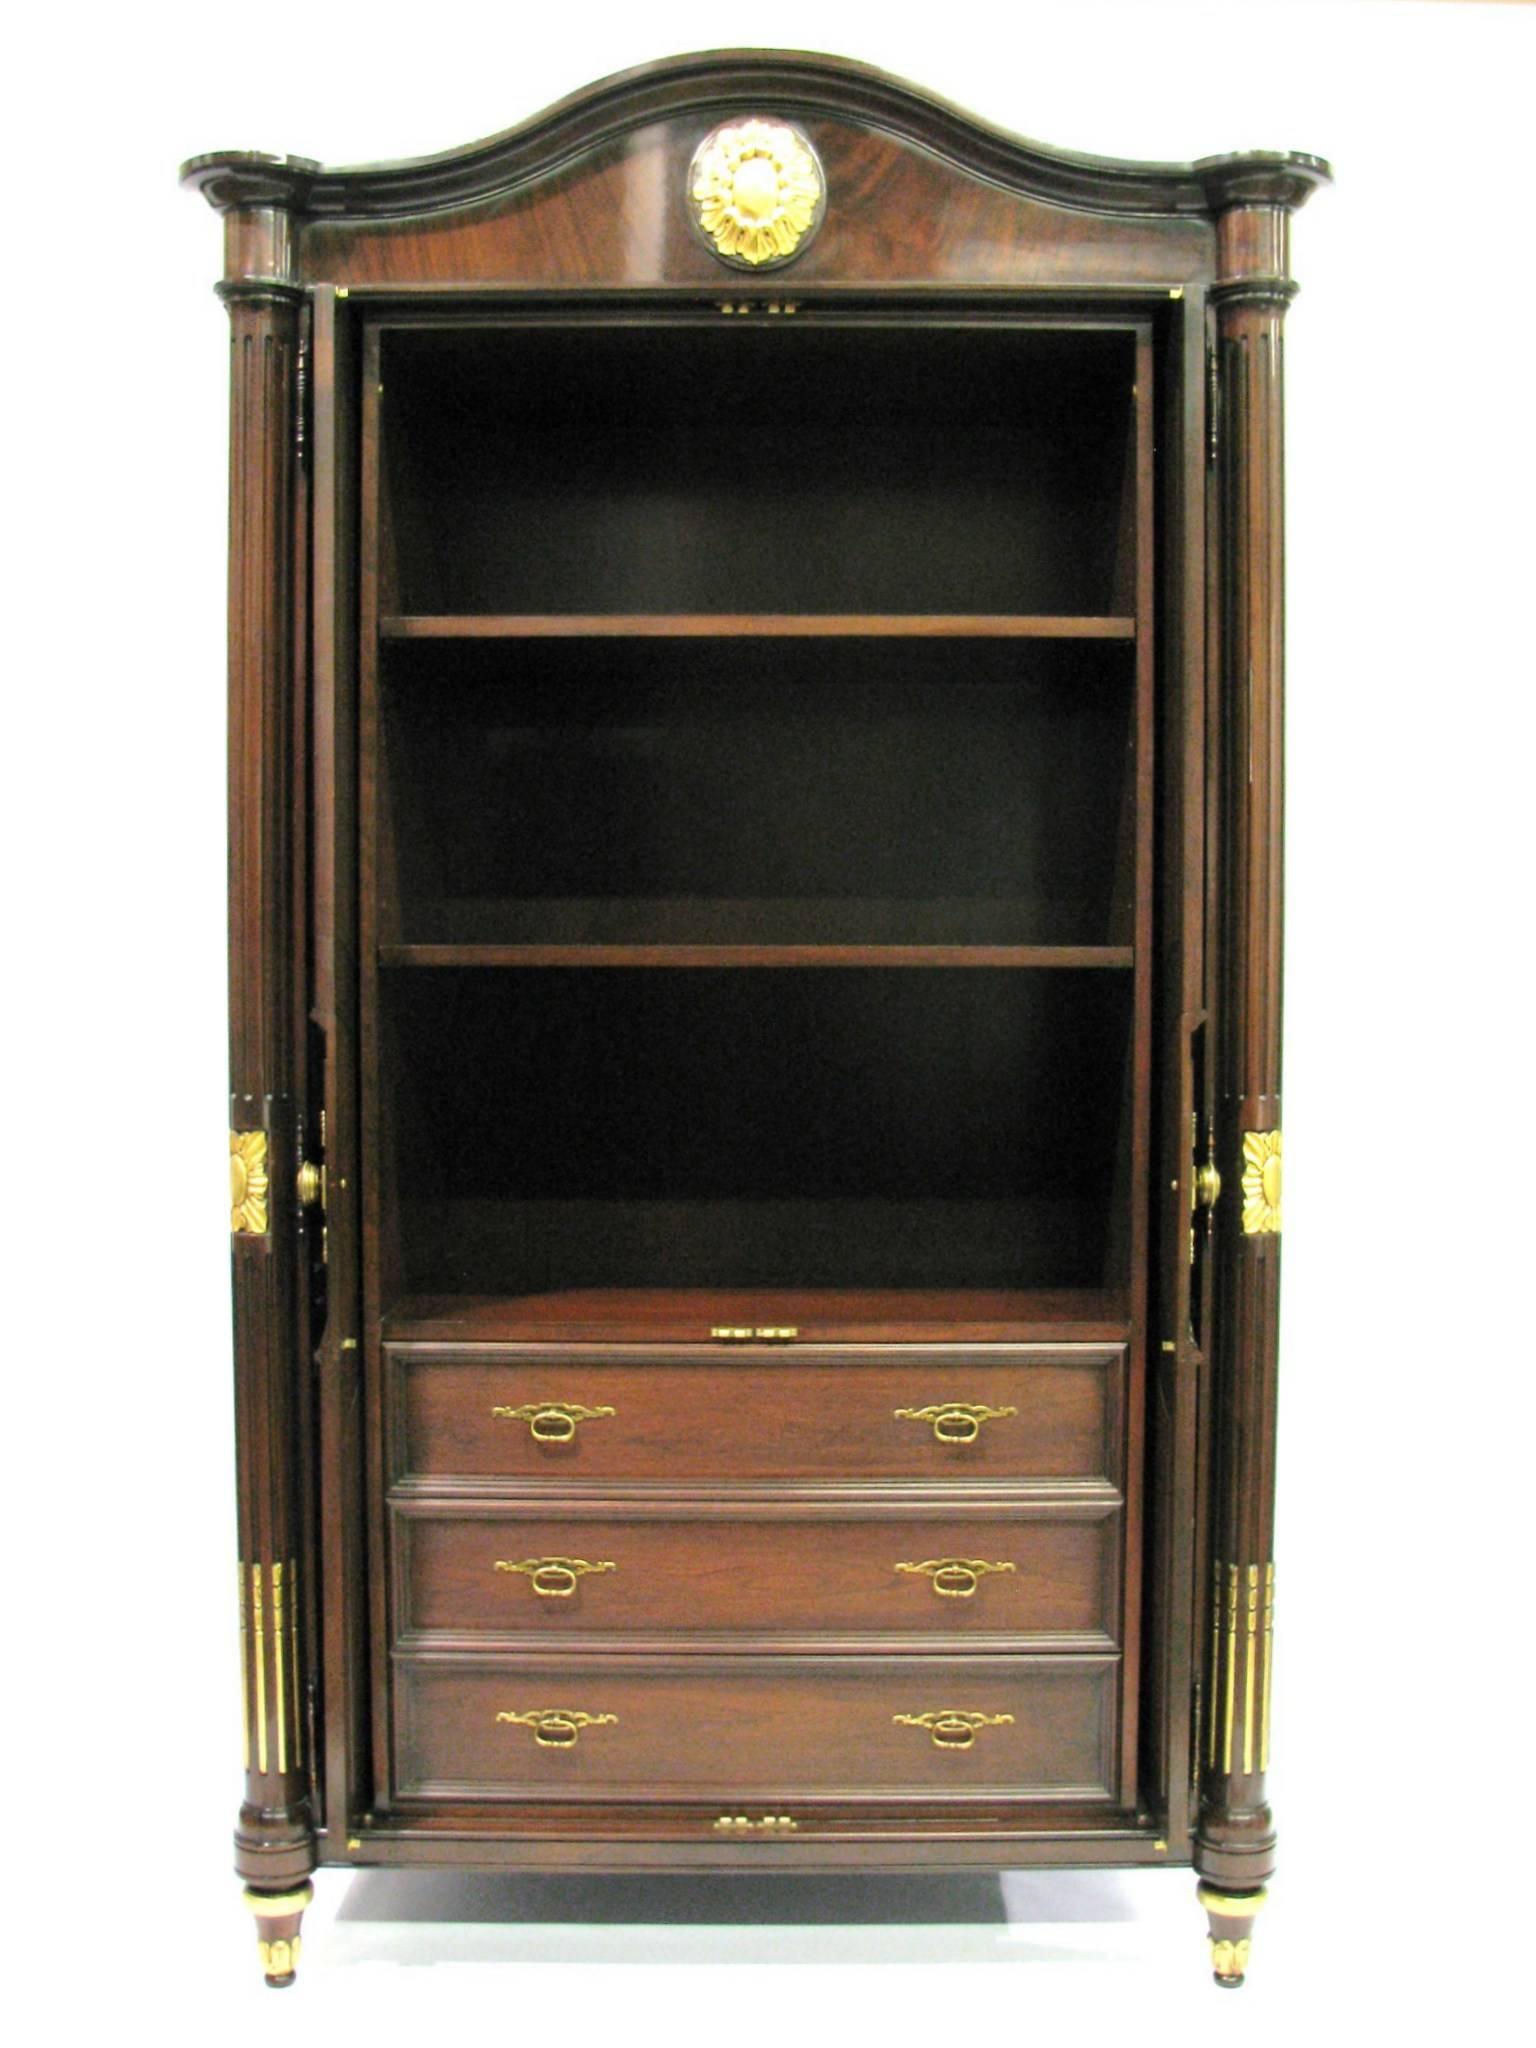 Stunning Karges Louis XVI style armoire. Hand-carved mahogany solids and flame veneer doors. Carved and gilded details. Highly polished finish. Two doors open to reveal three shelves (Two are adjustable) over three drawers. Doors slide inward and